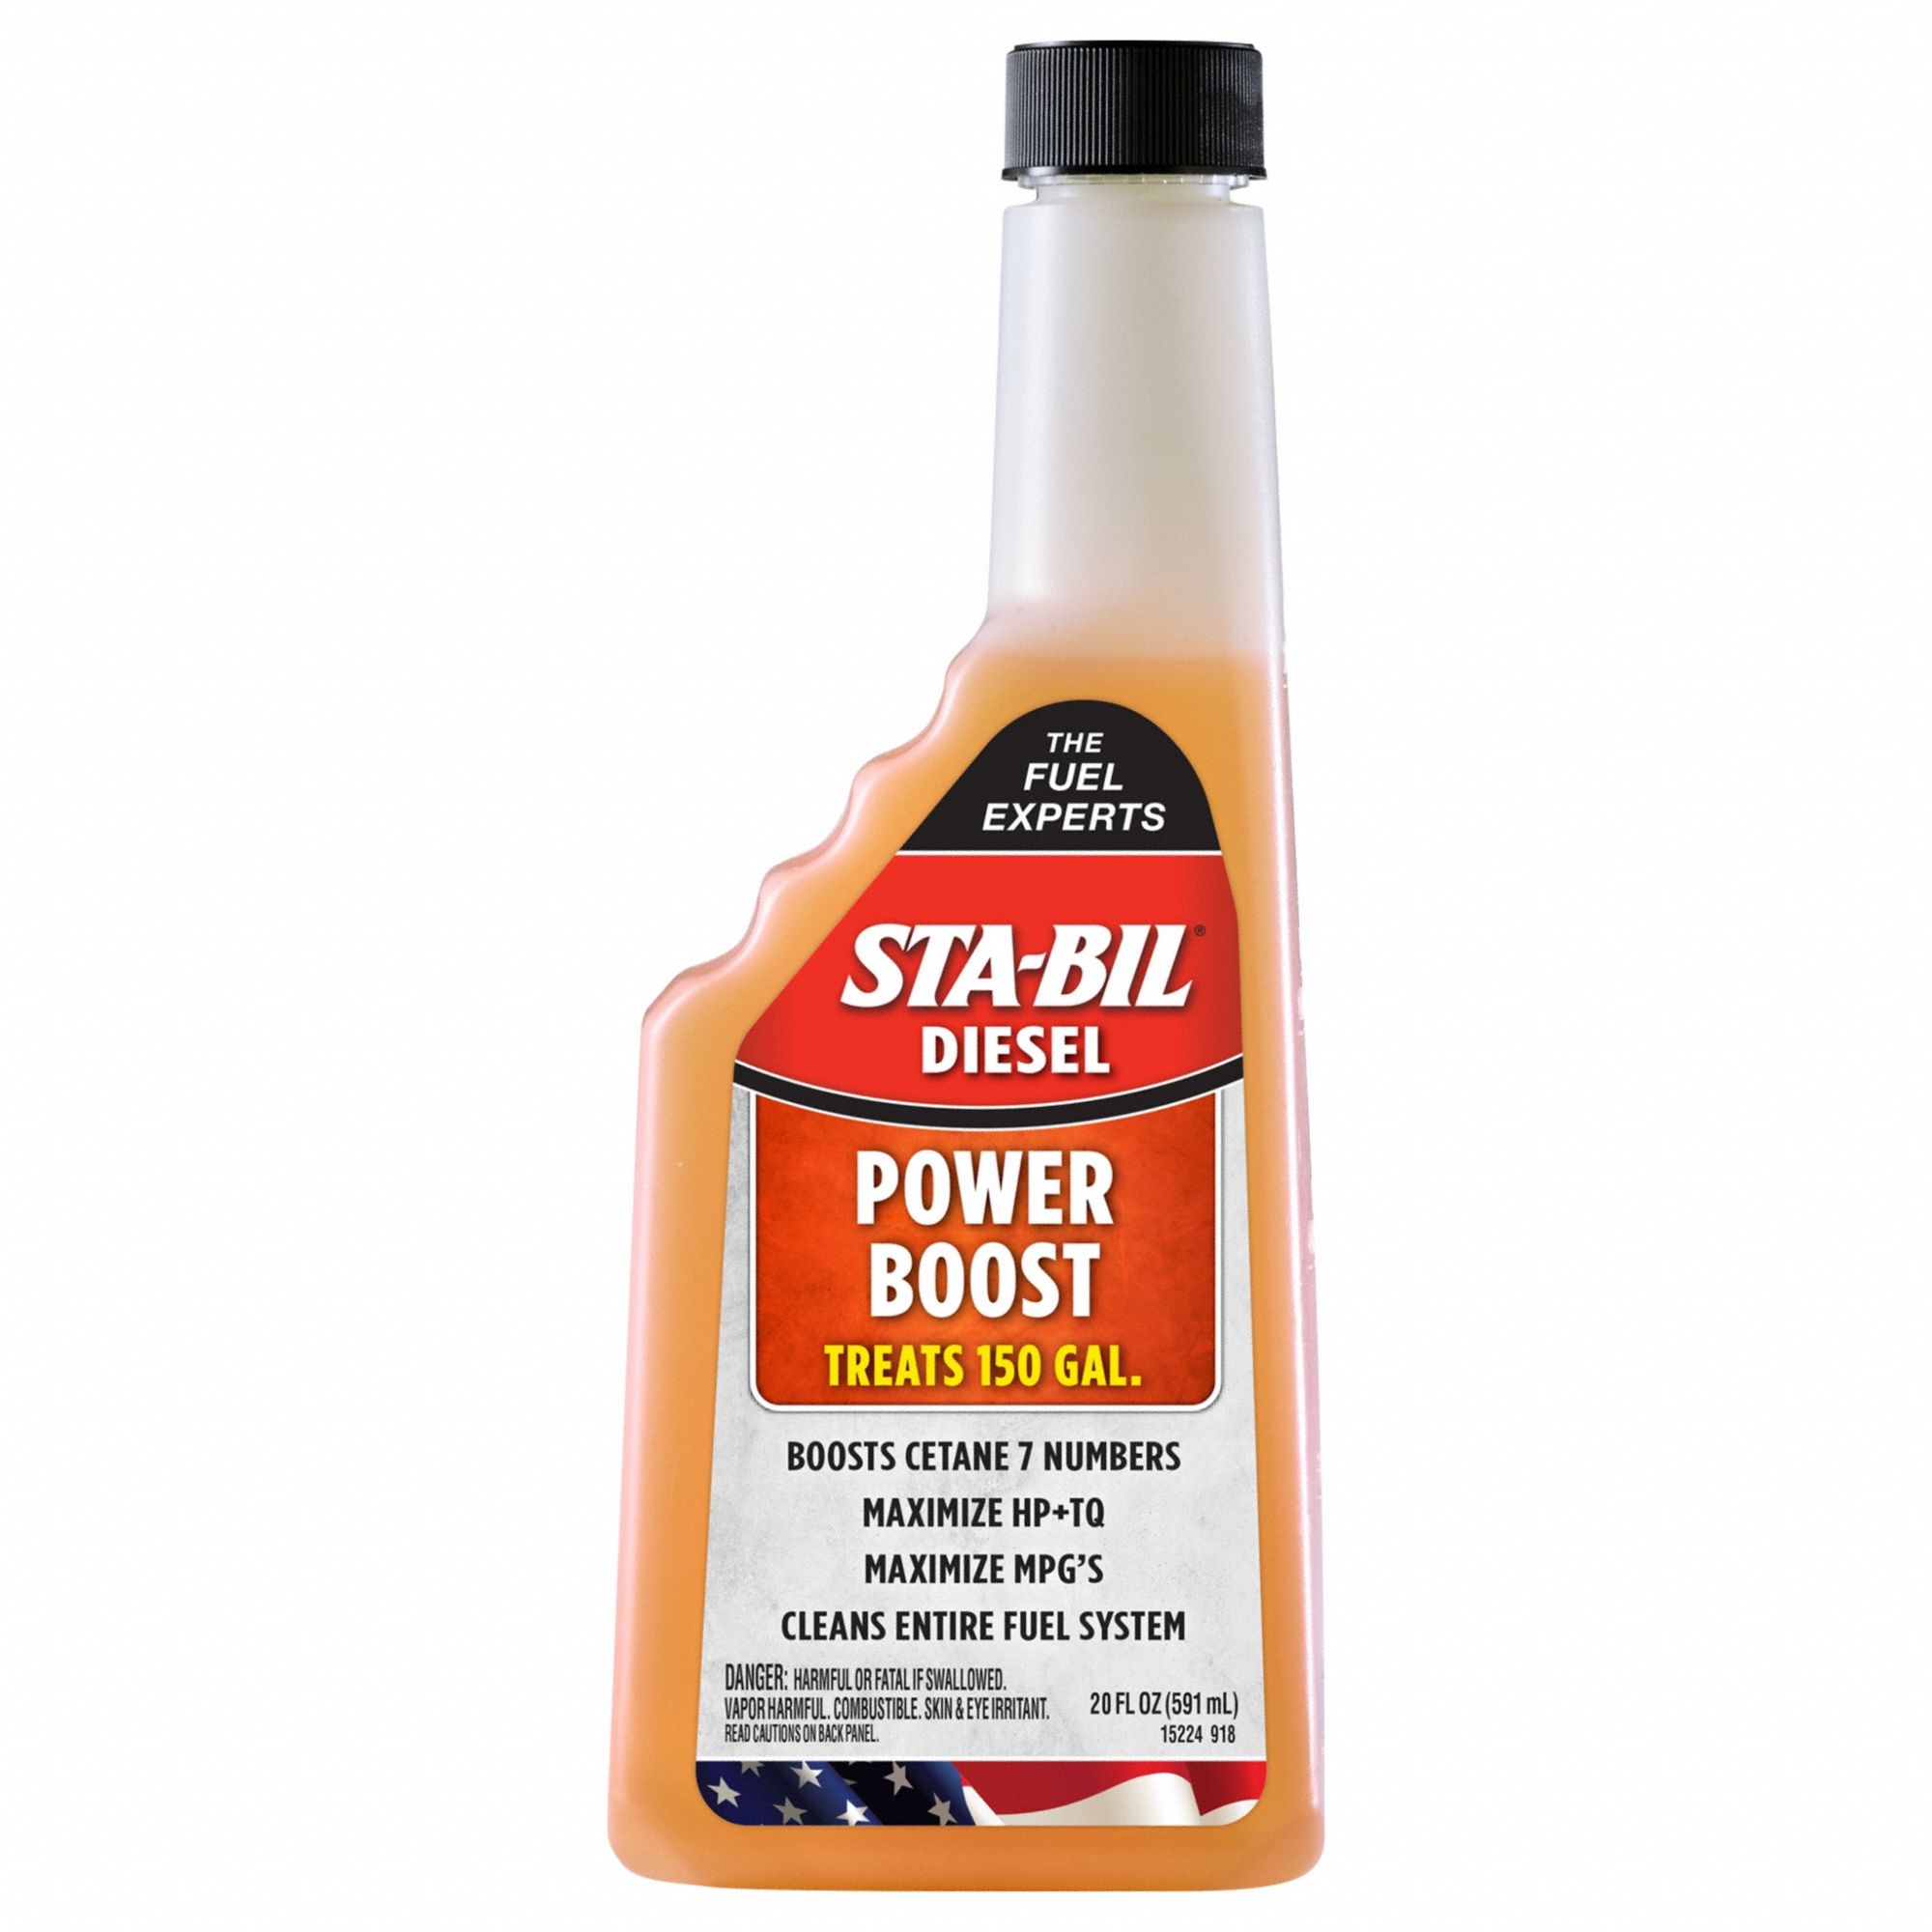 Performance Improver and Cetane Booster: Power Boost, Cetane, 20 fl oz Container Size